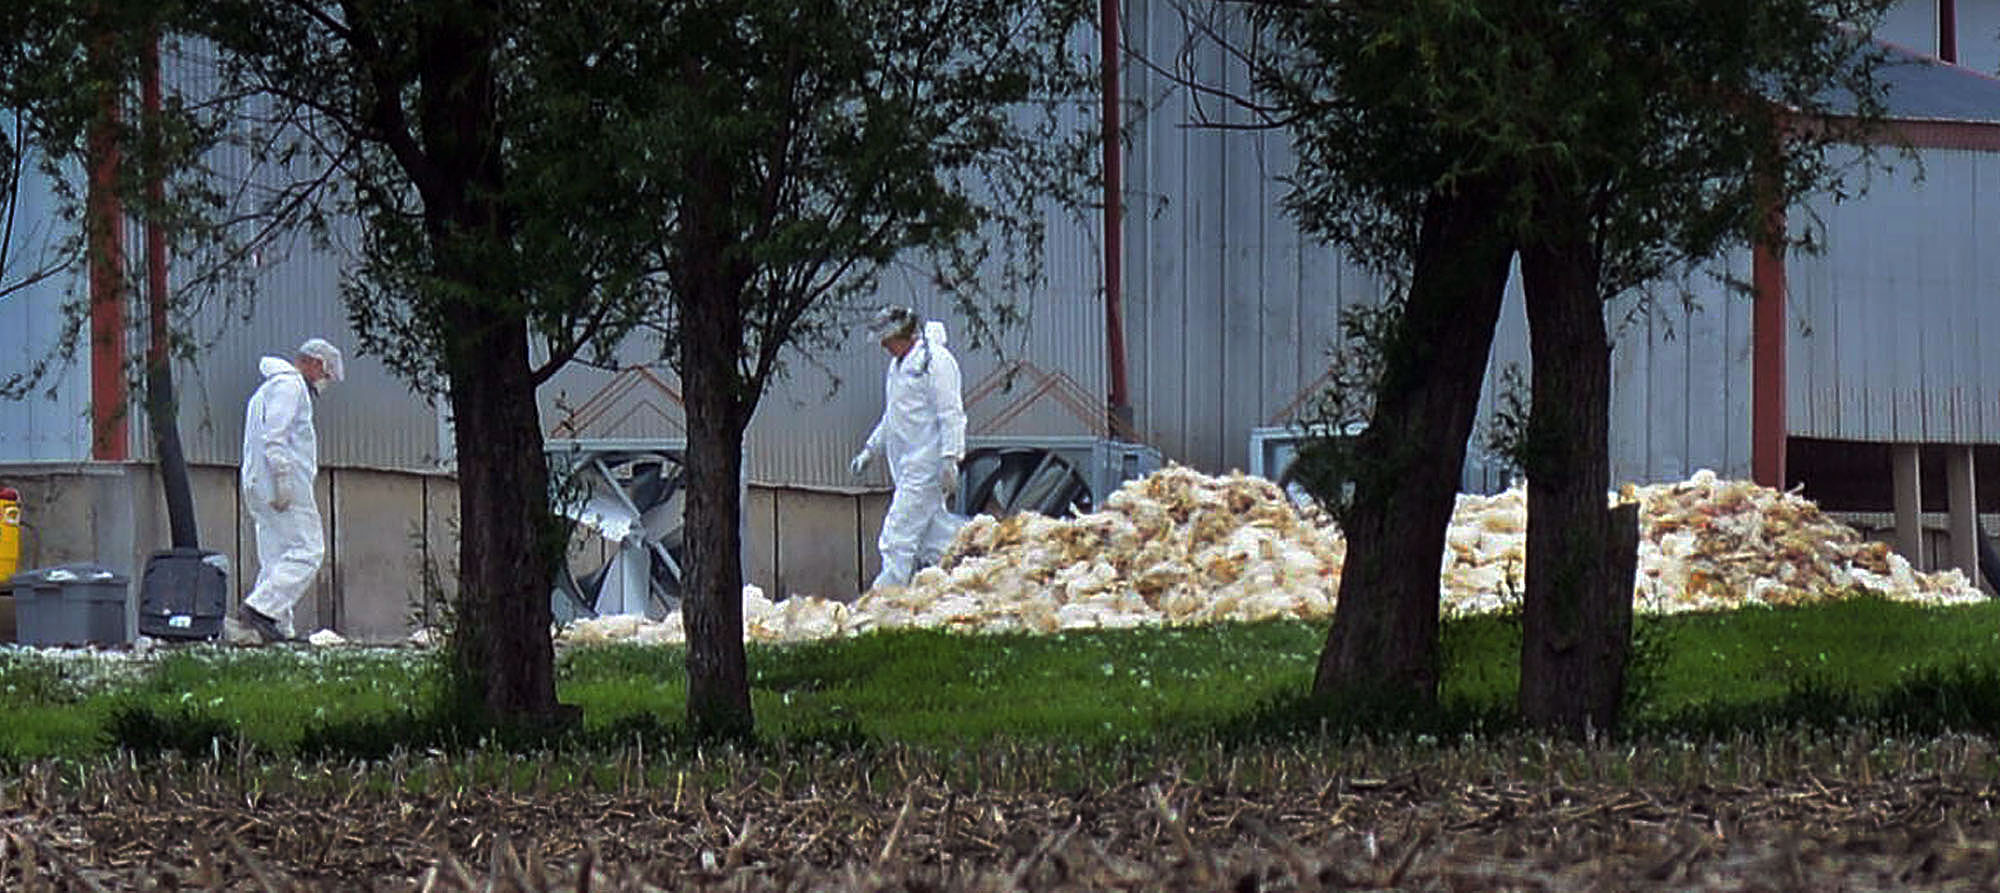 In this May 11, 2015 photo provided by John Gaps III, men in hazardous materials suits load dead poultry to be buried at Rose Acre Farms, Inc., just west of Winterset, Iowa.